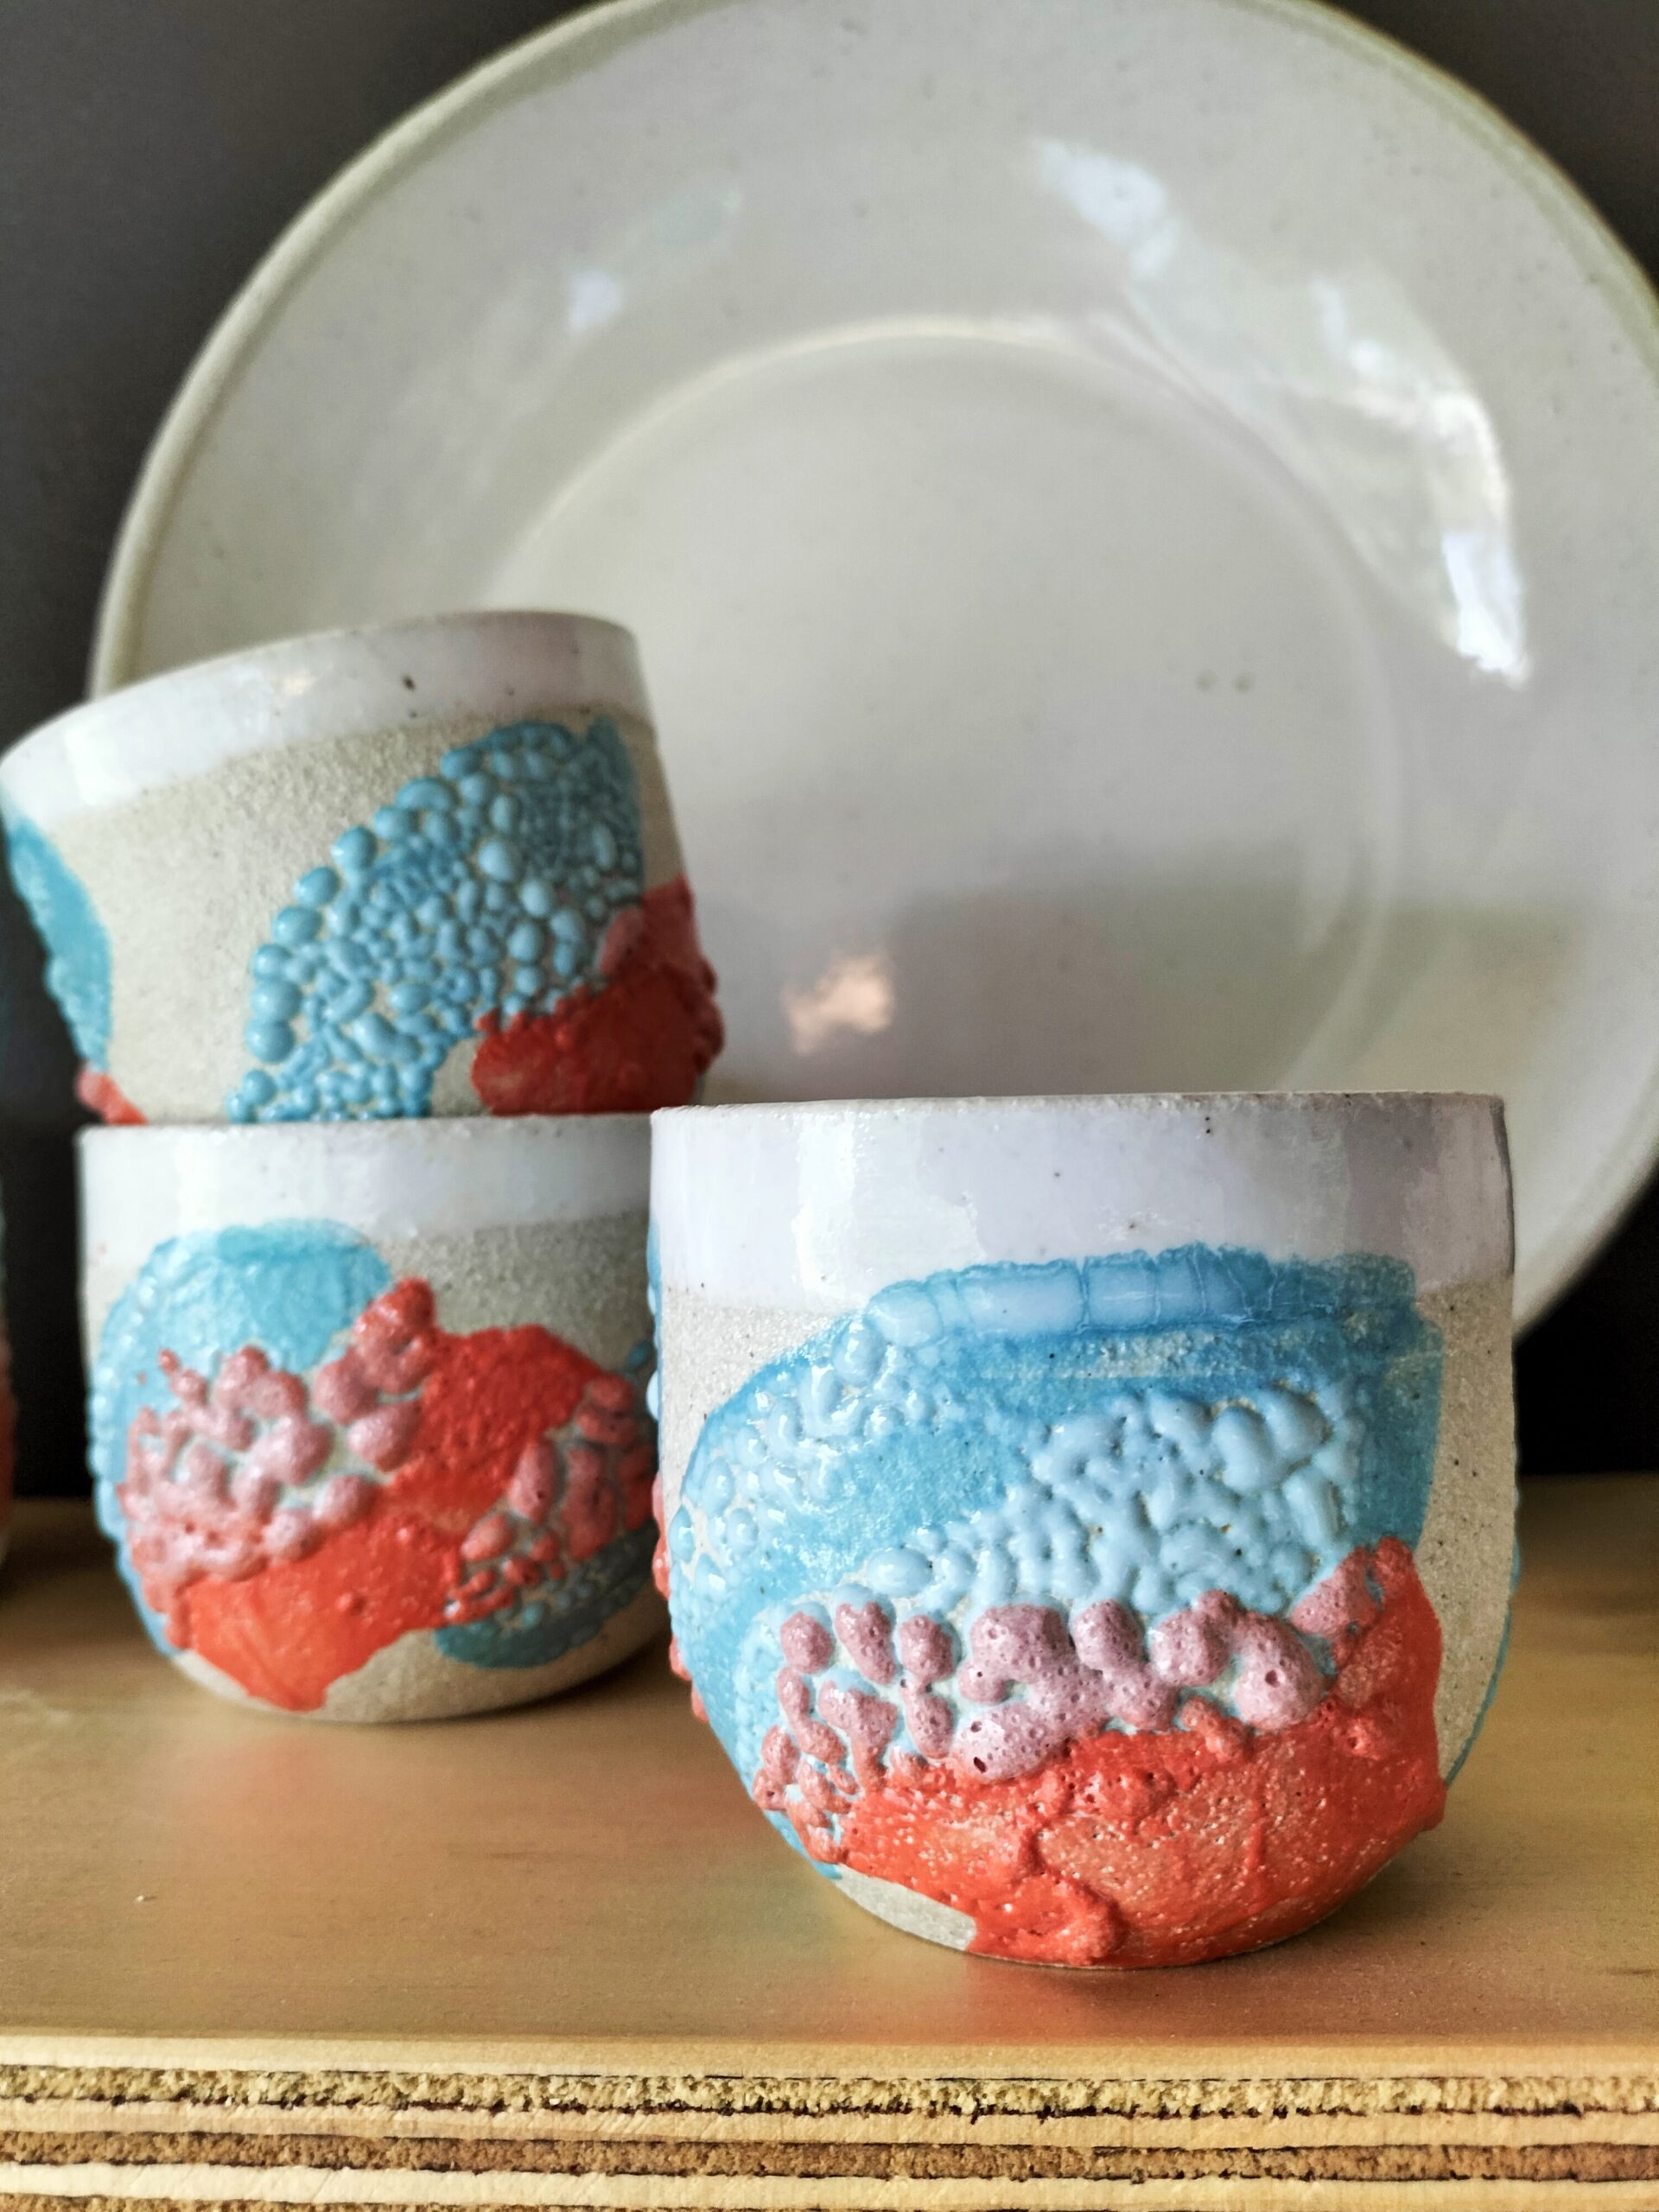 Image shows three cups in the blue and orange glaze called Bay of Fires and a white plate by Christie Lange in her Artist Profile Art Trails Tasmania